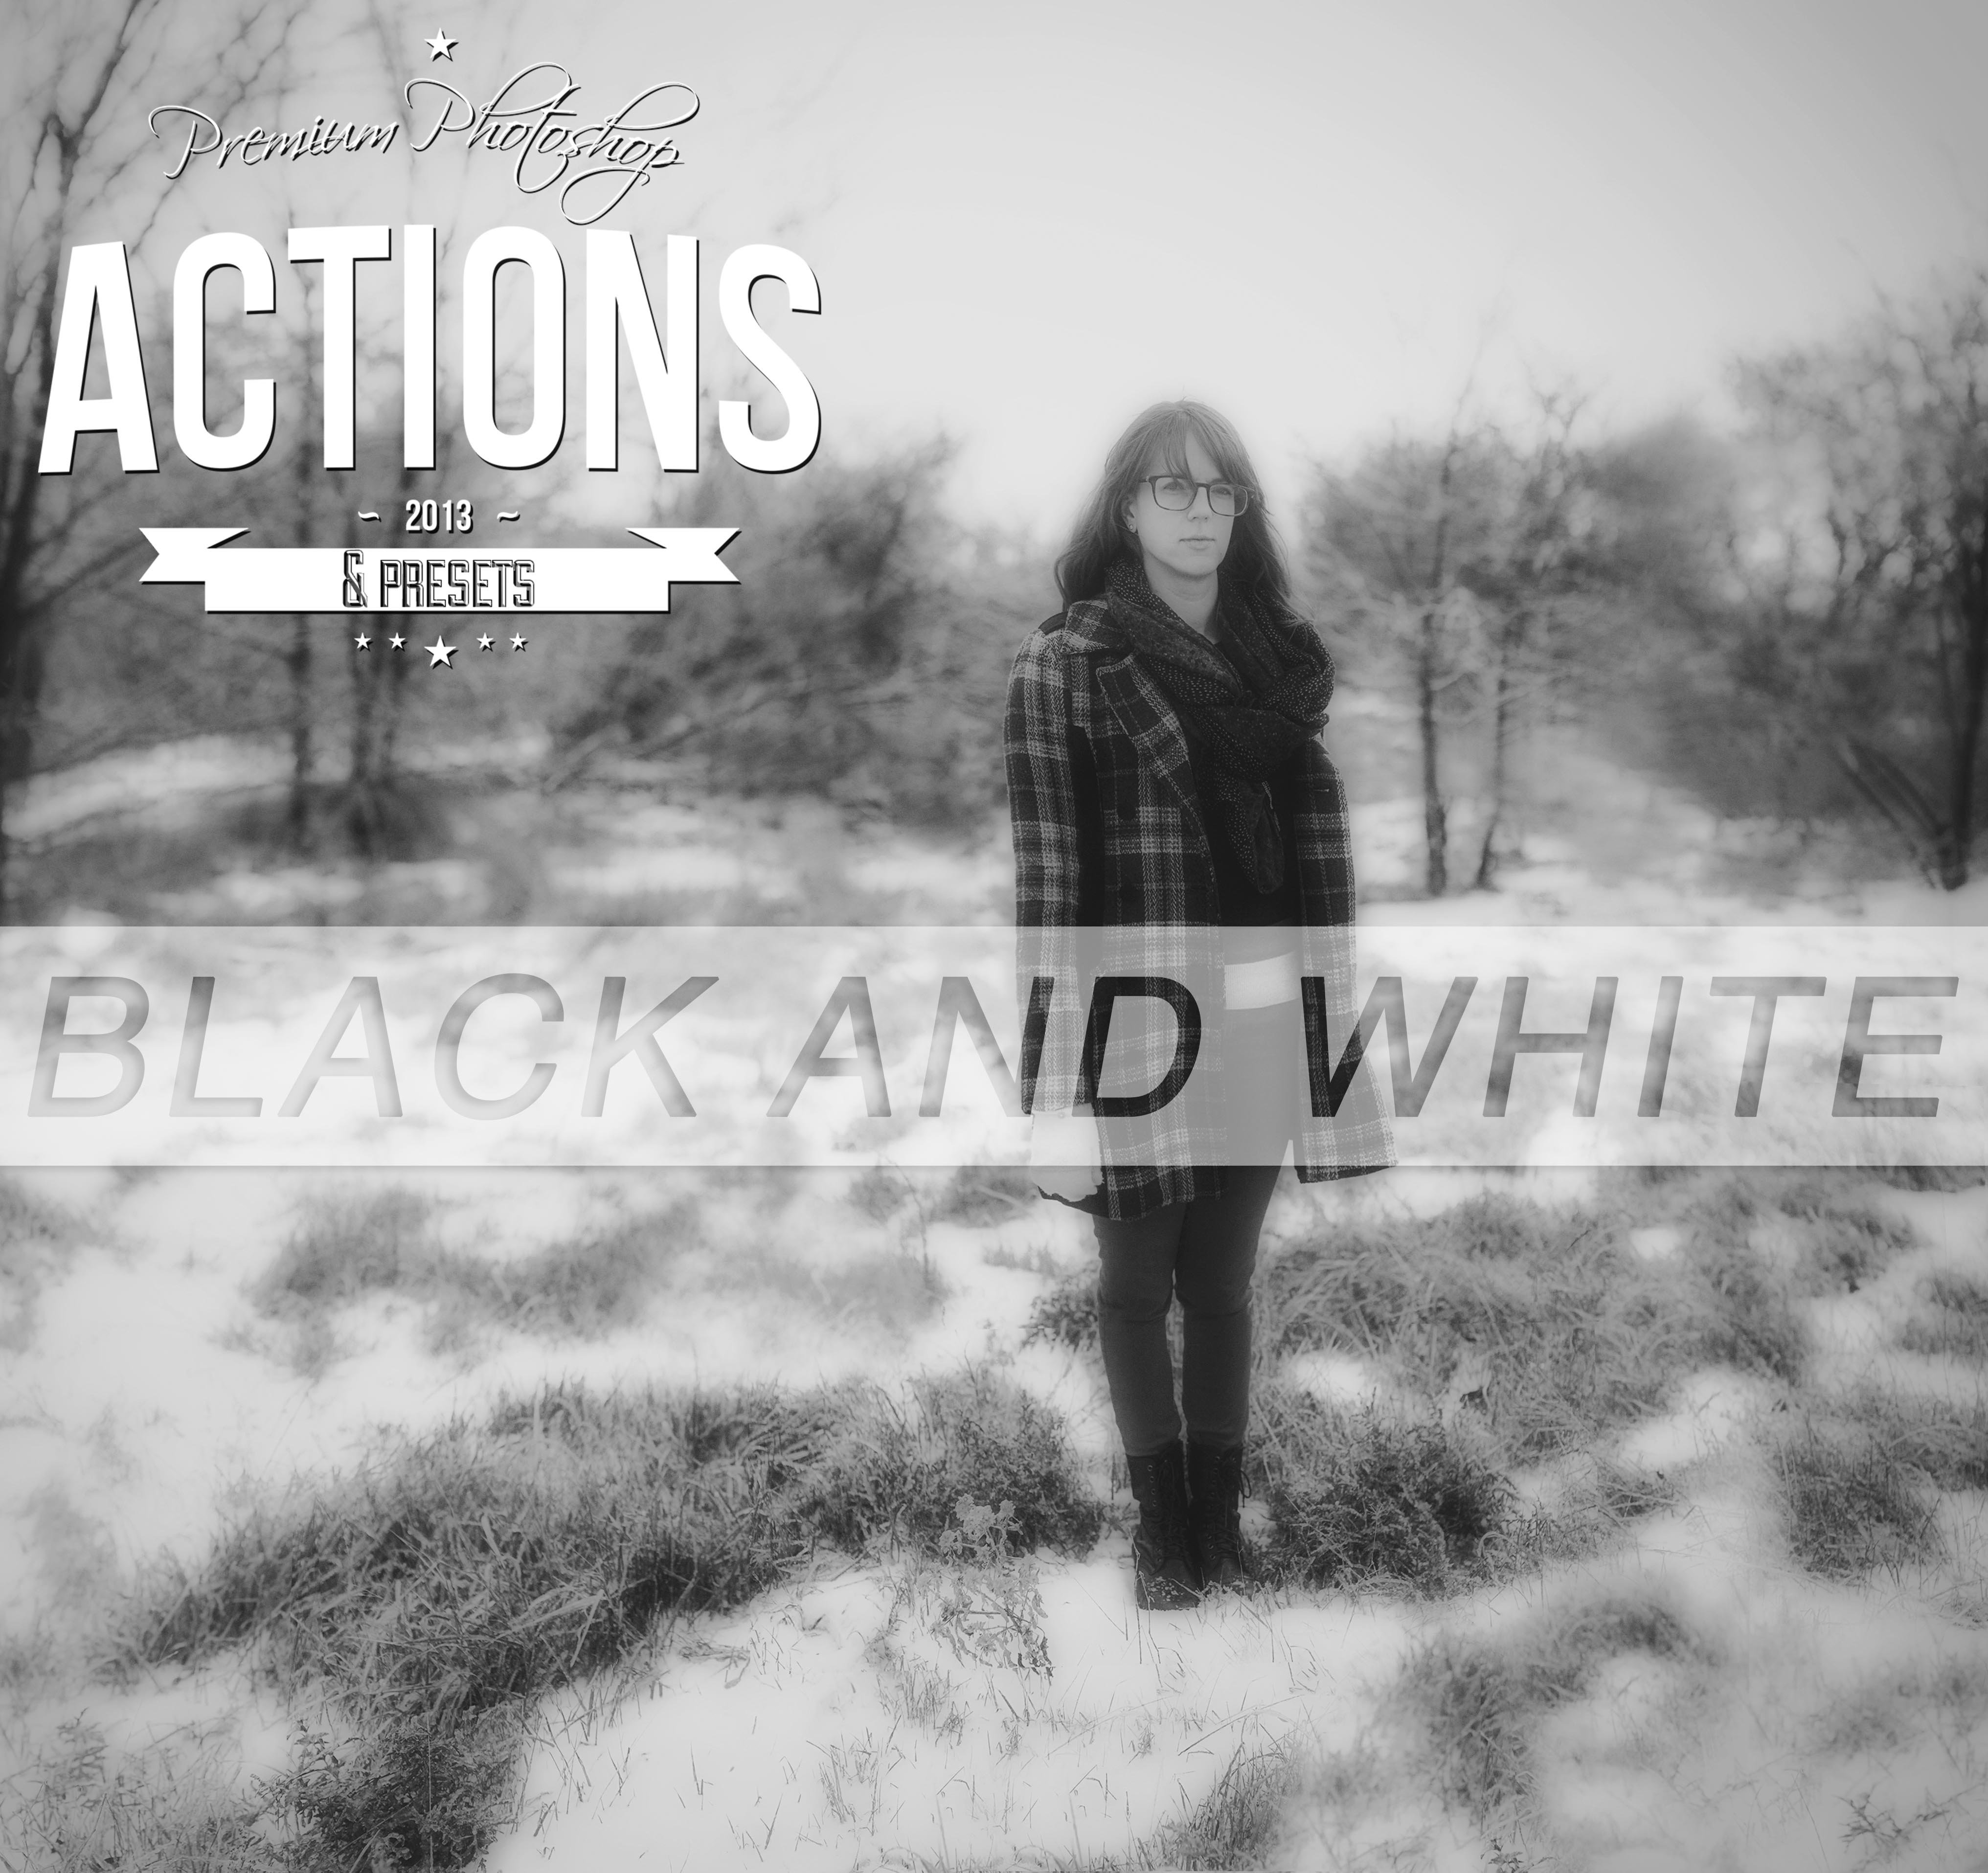 Black and White Photoshop Actionscover image.